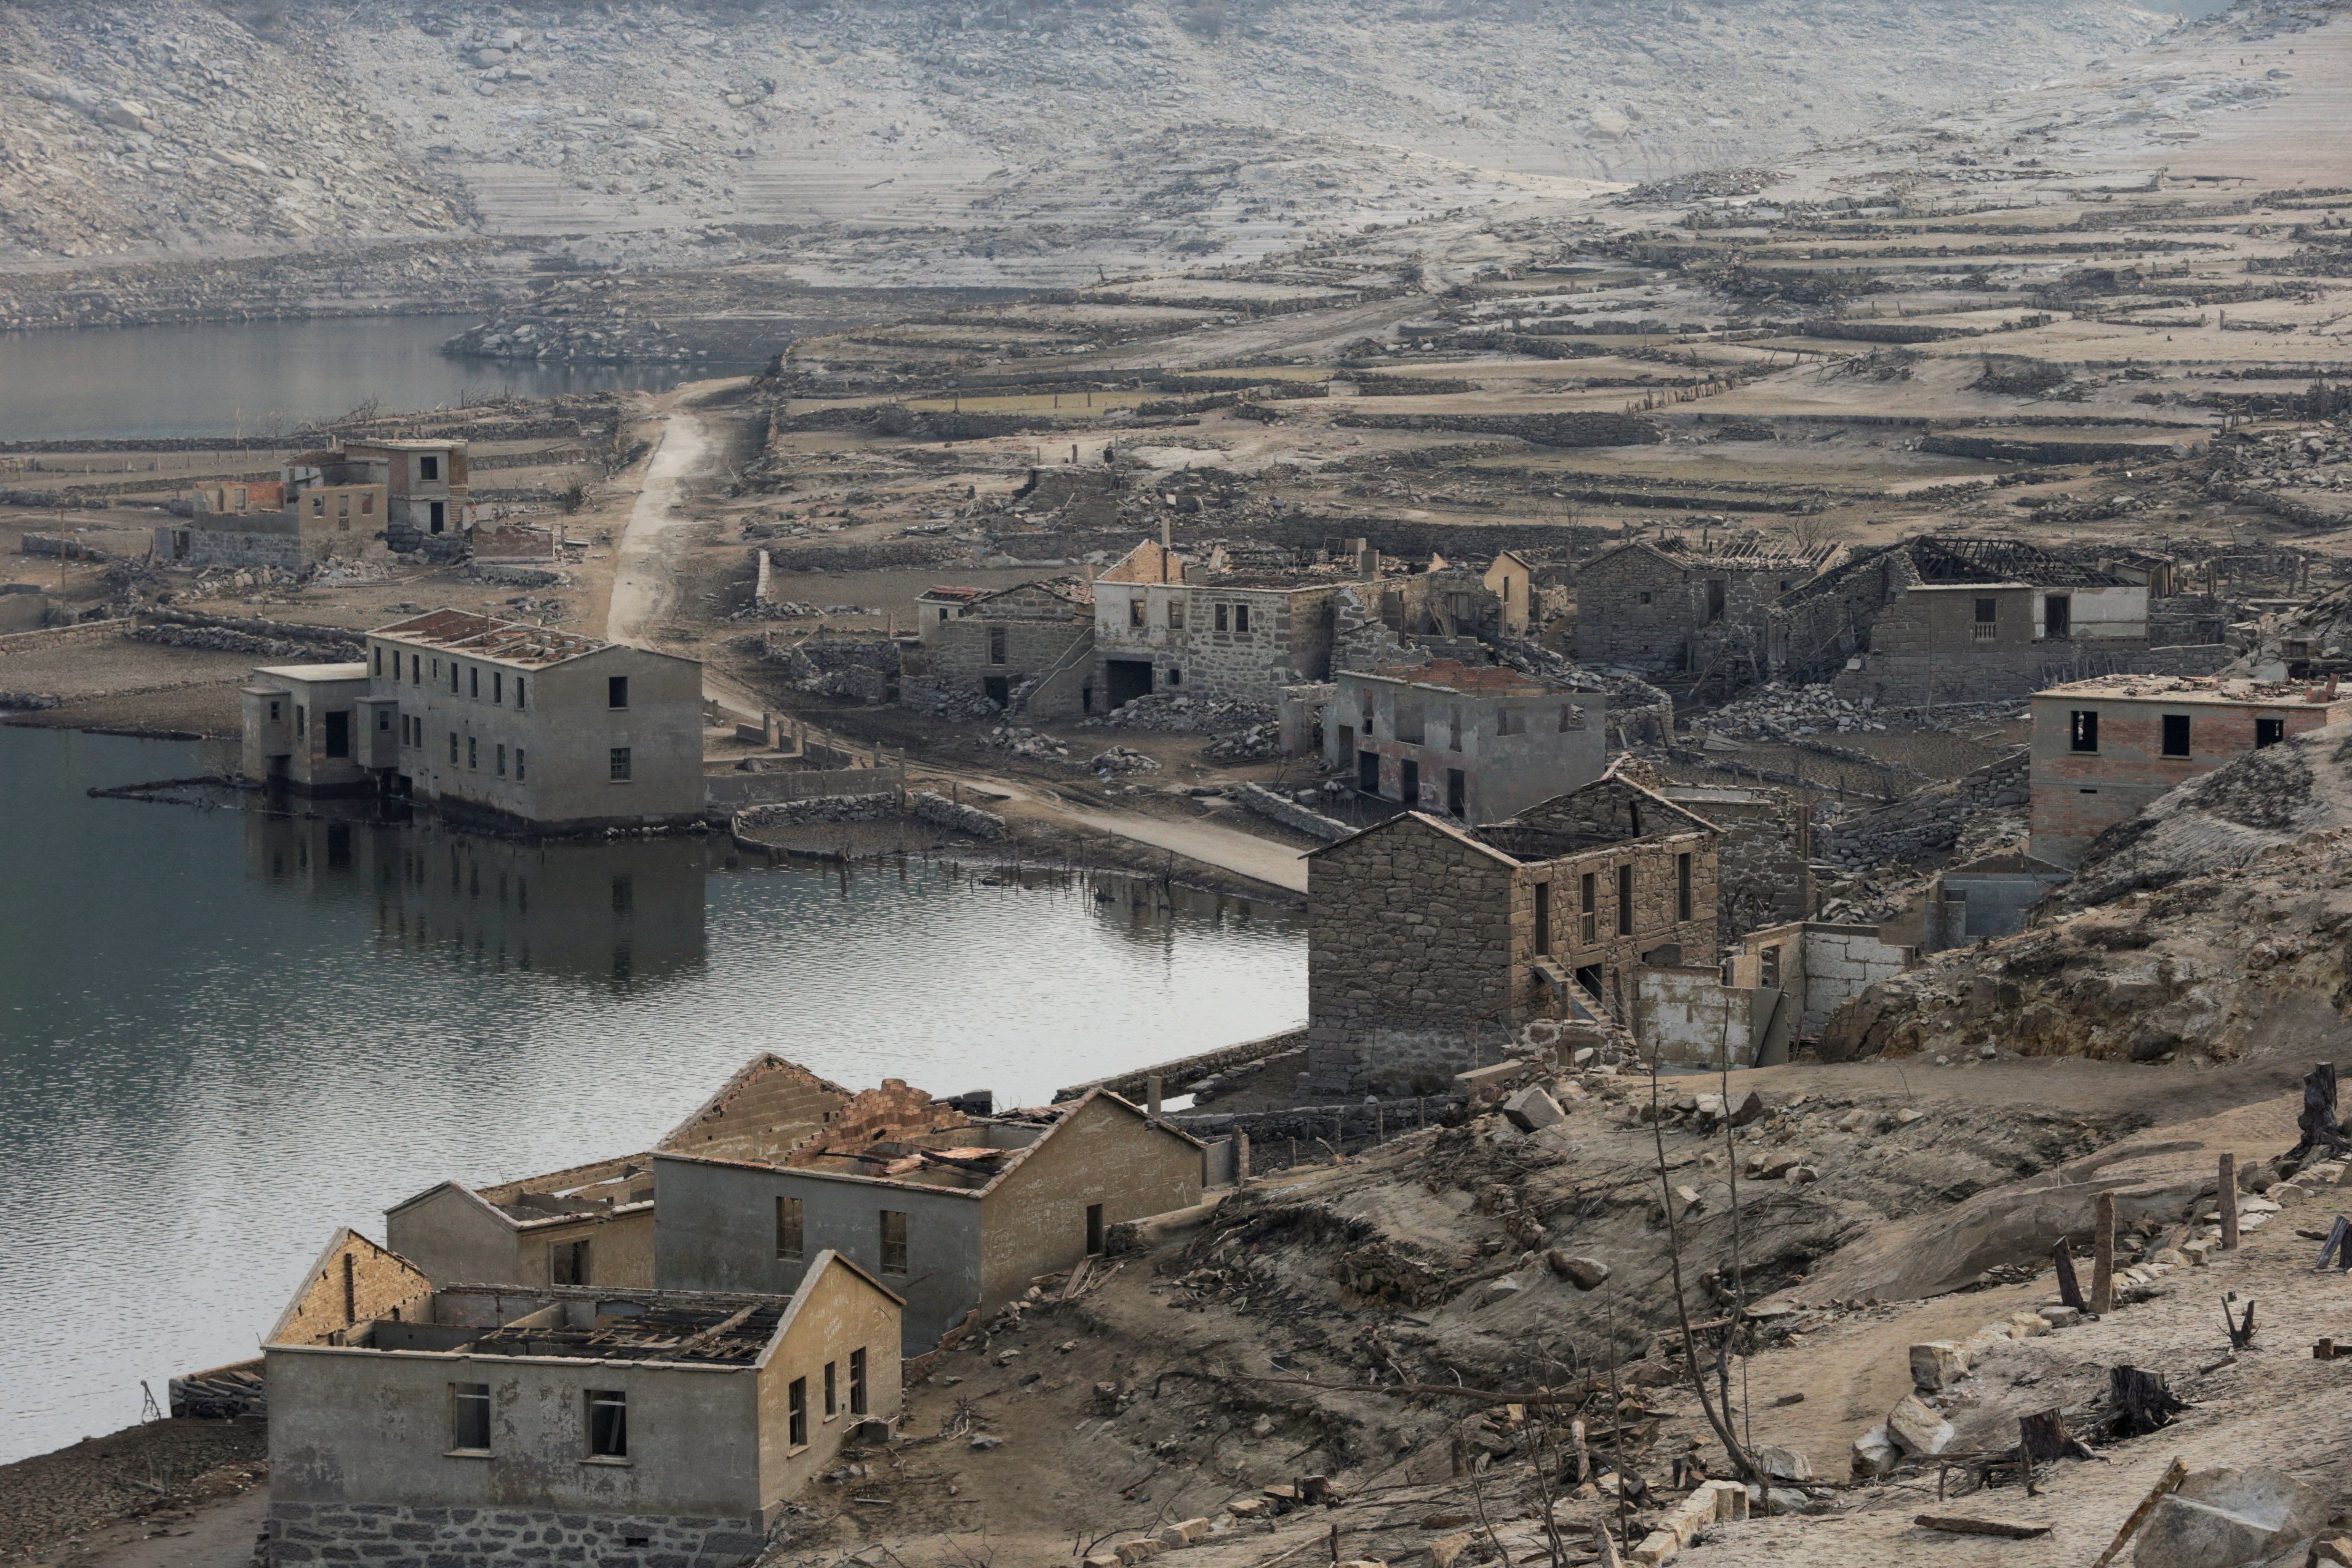 Old Spanish town re-emerges as drought dries out reservoir